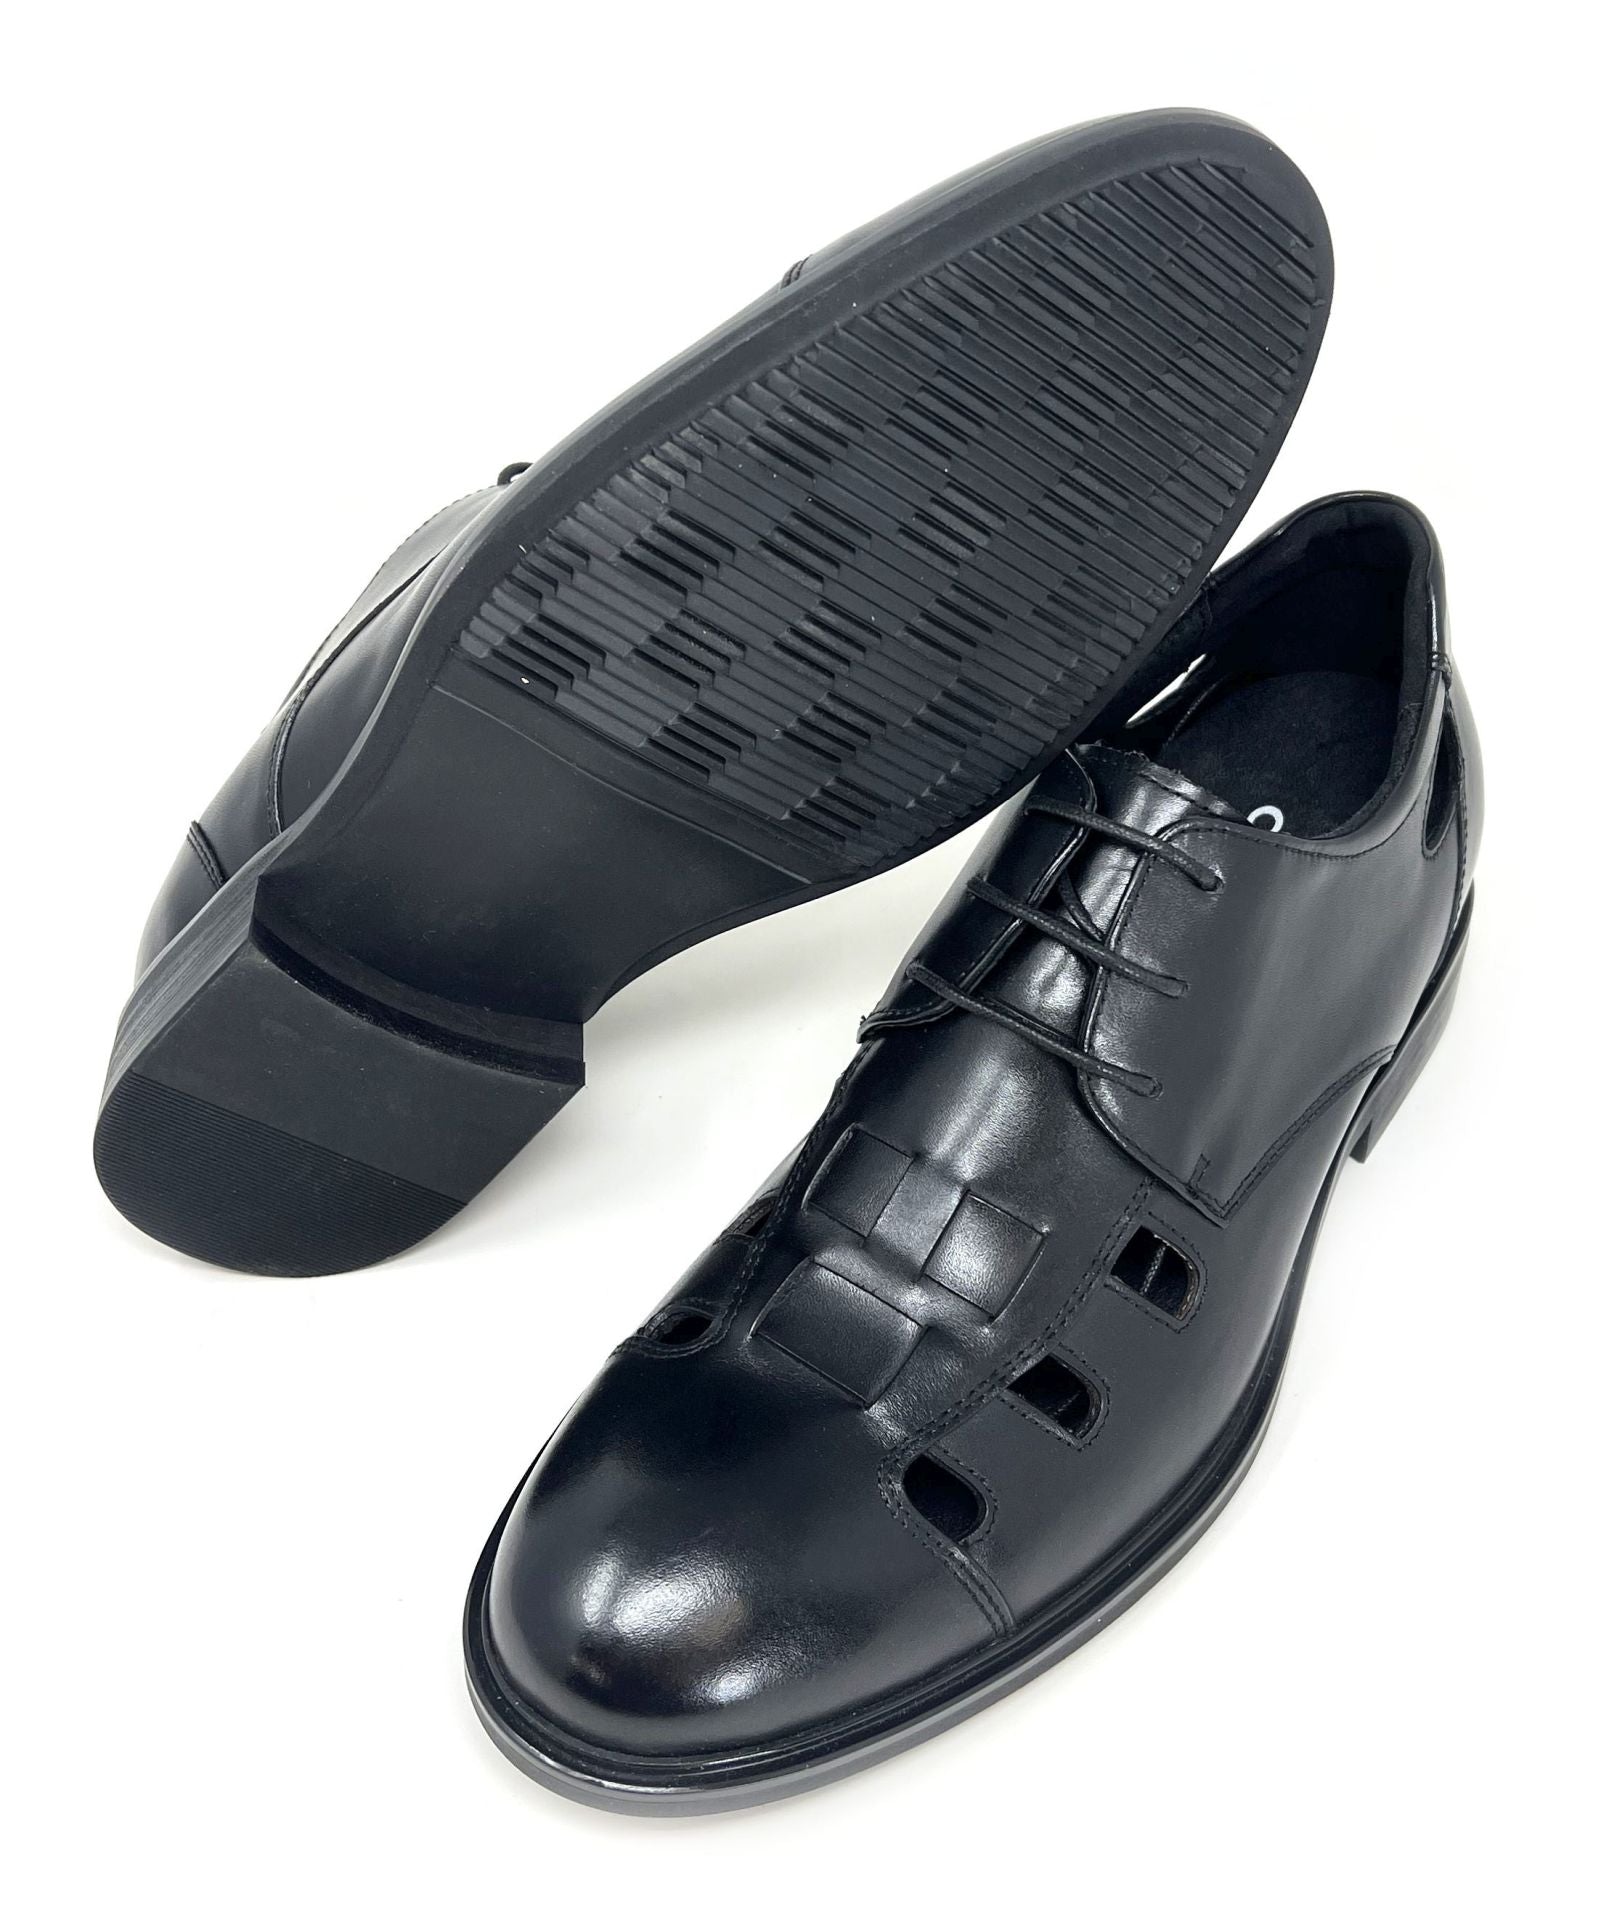 Elevator shoes height increase FSP0087 - 2.6 Inches Taller (Black) - Size 7.5 Only